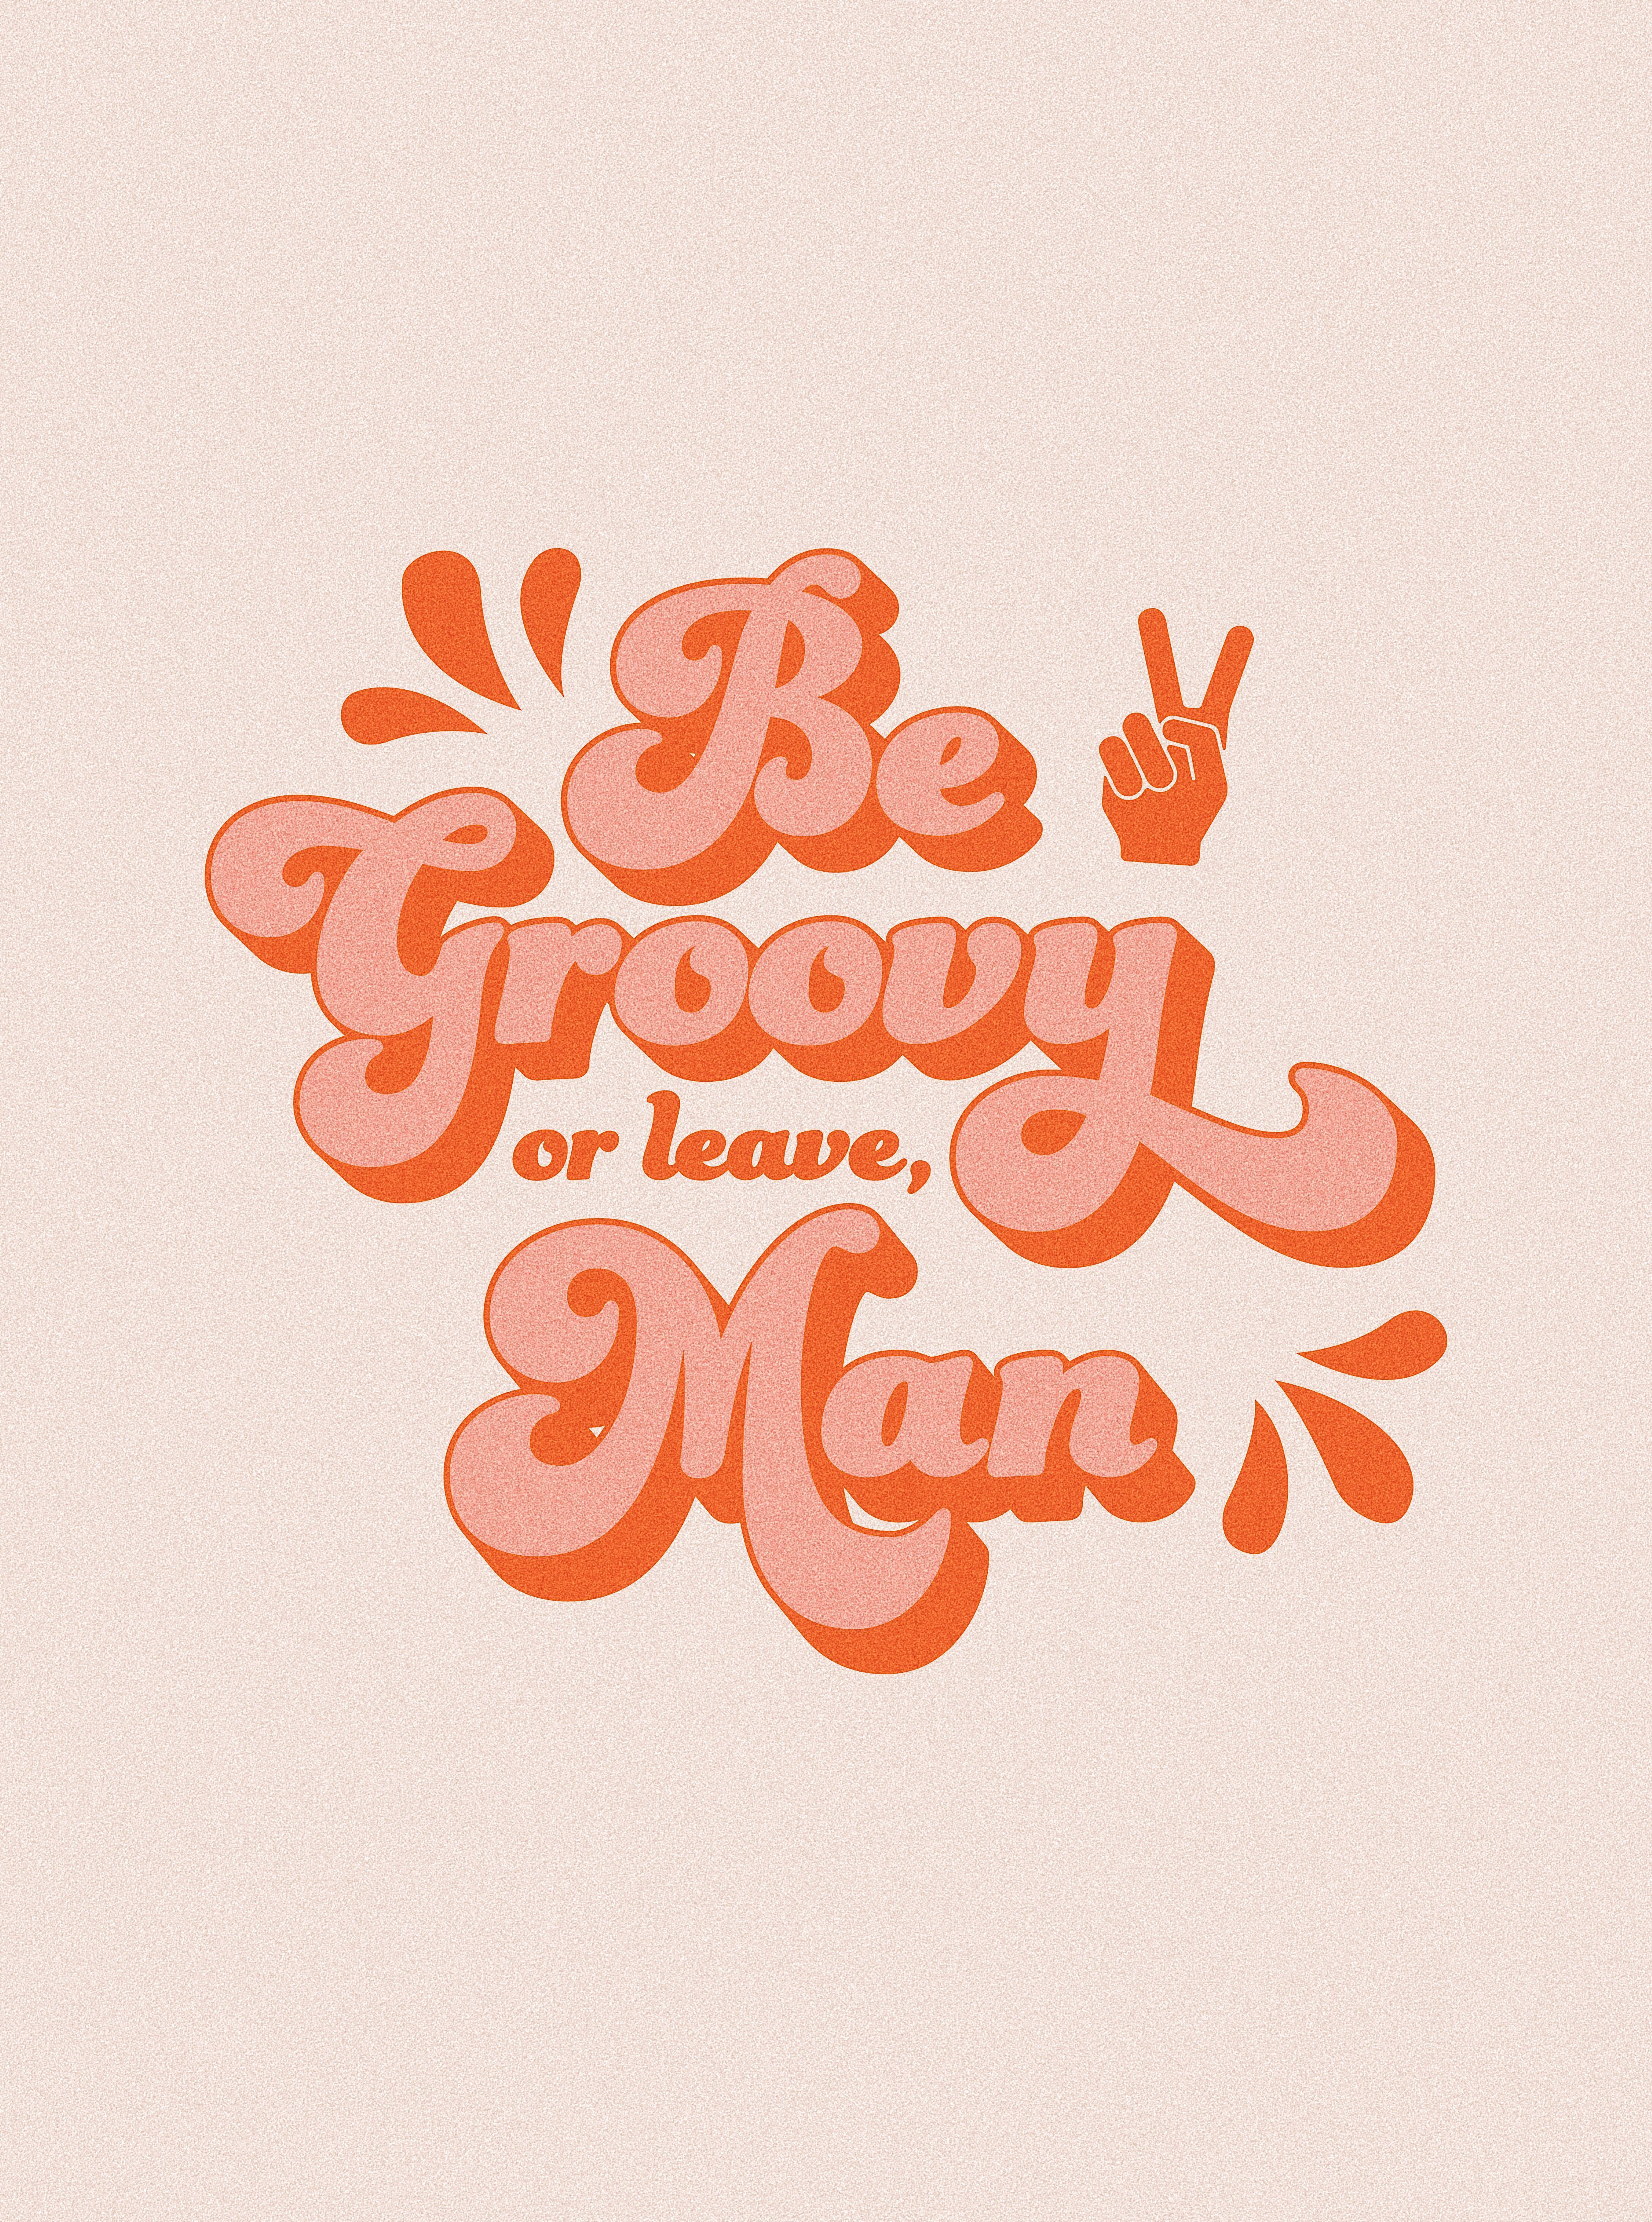 A poster that says be groovy or leave man - Calligraphy